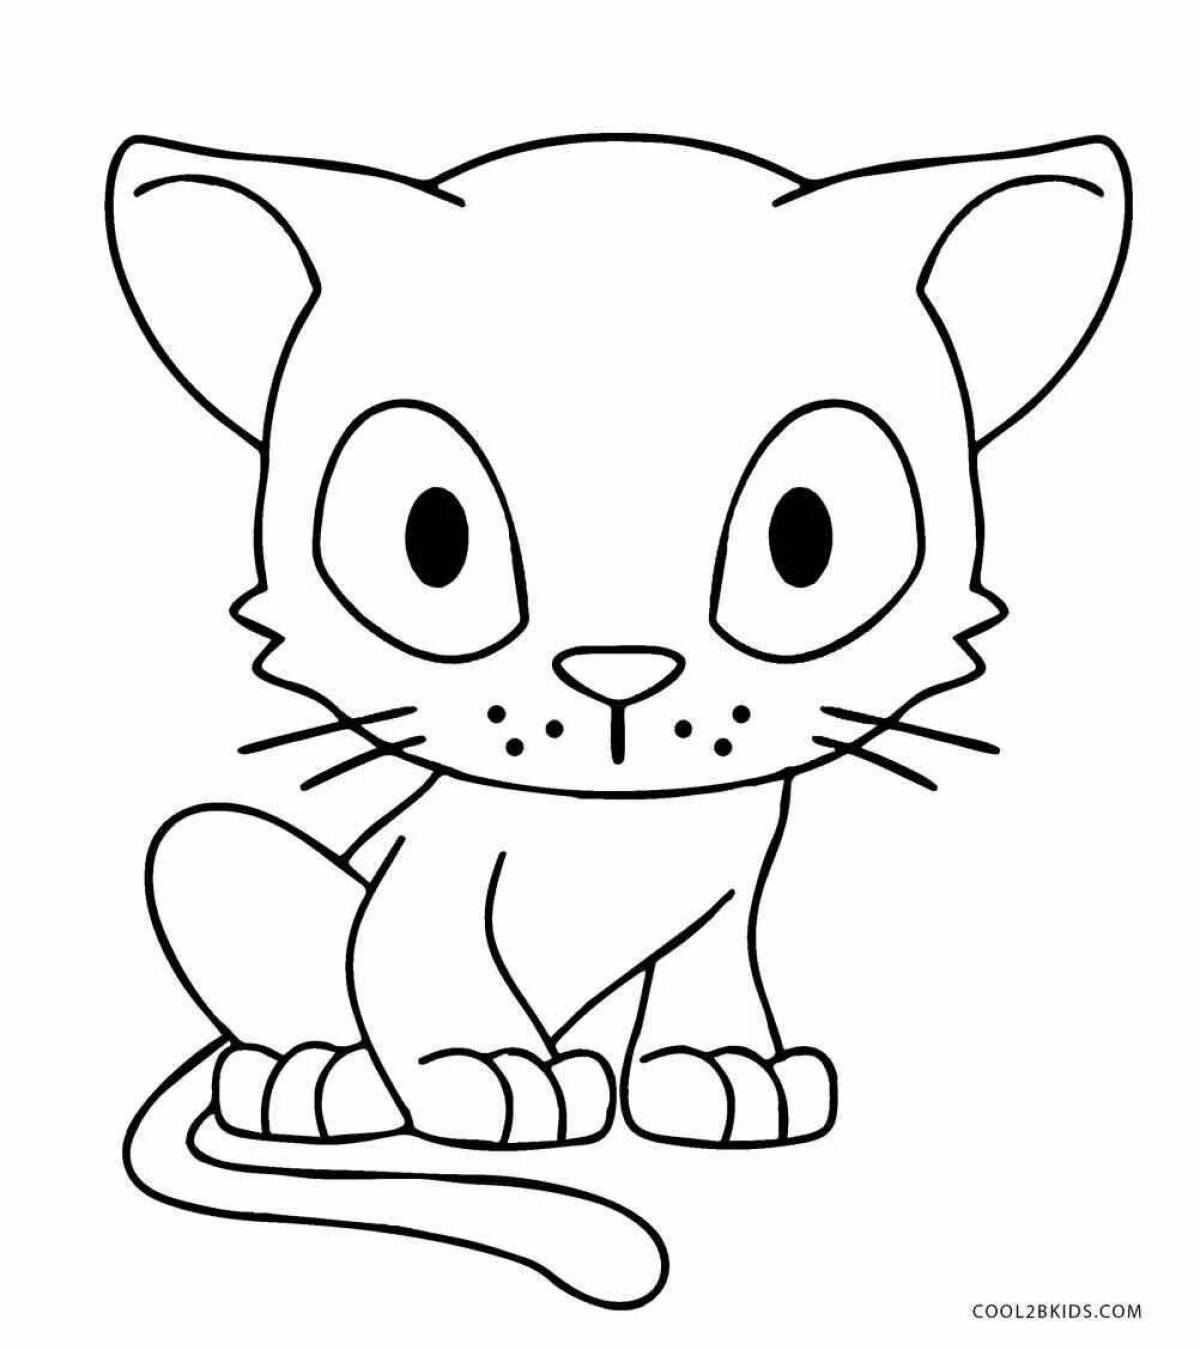 Live little cute kittens coloring book